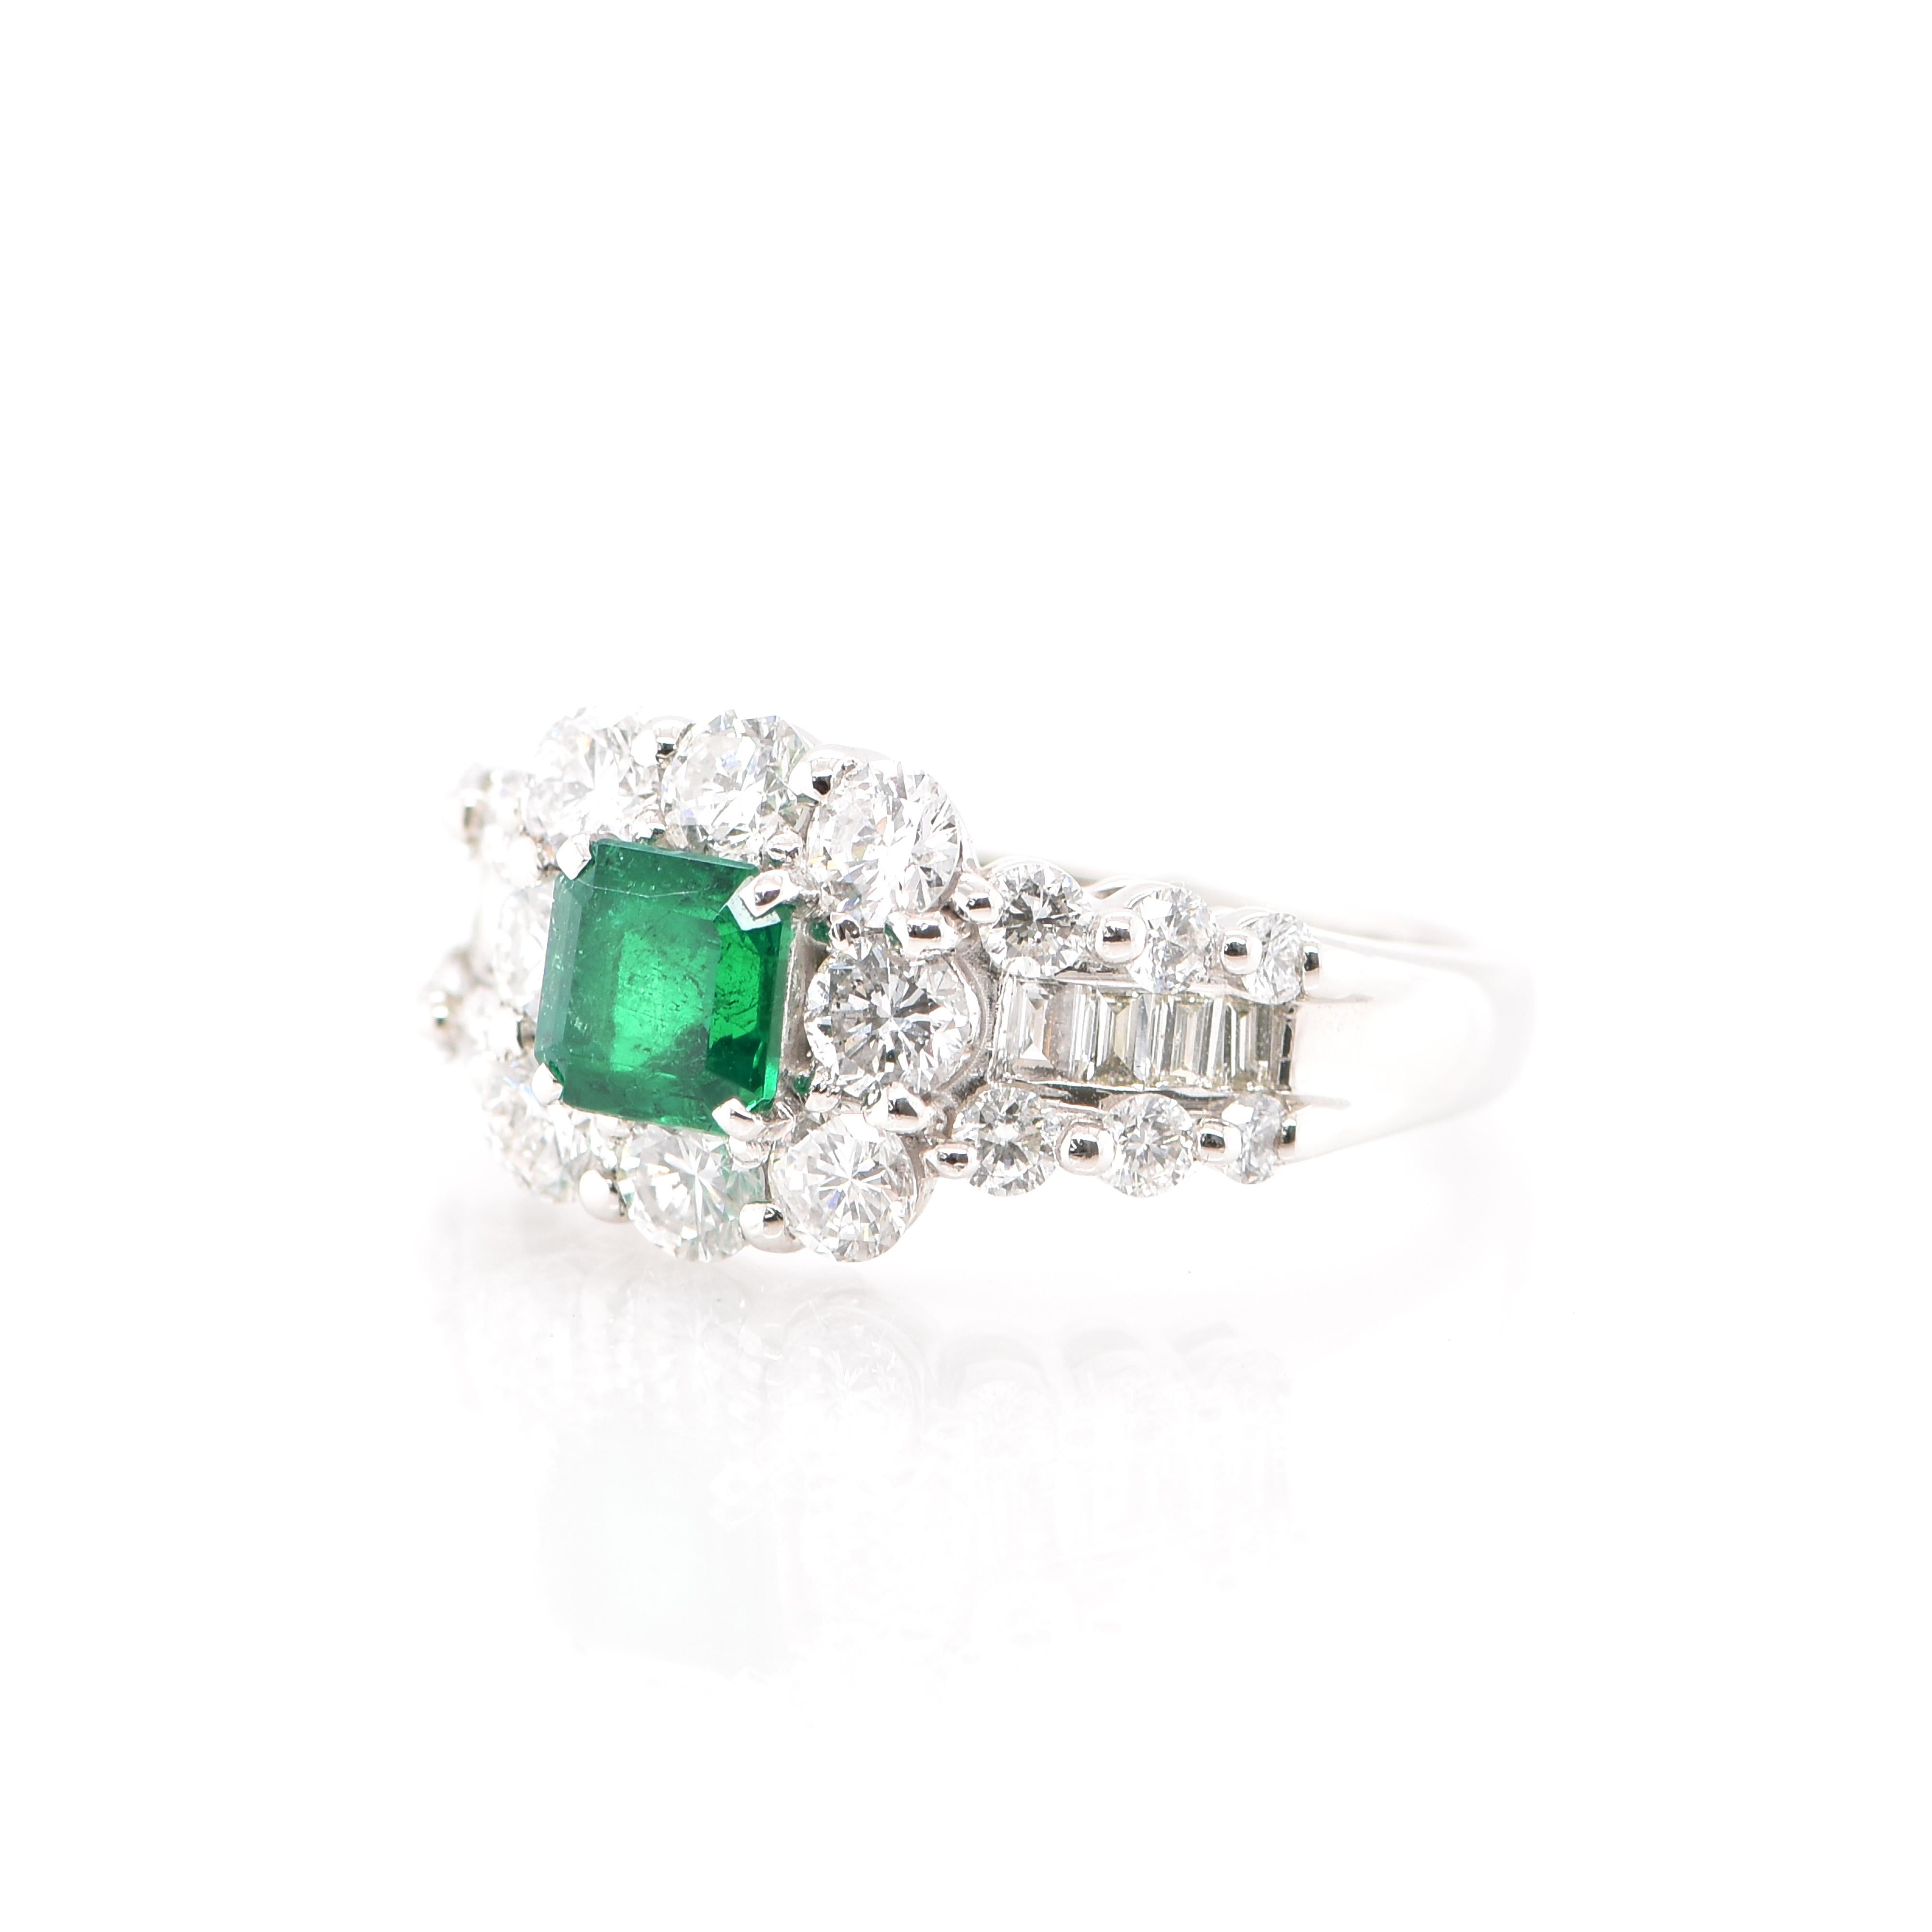 A stunning Halo Ring featuring a 0.73 Carat Vivid Green Emerald and 1.67 Carats of Diamond Accents set in Platinum. People have admired emerald’s green for thousands of years. Emeralds have always been associated with the lushest landscapes and the